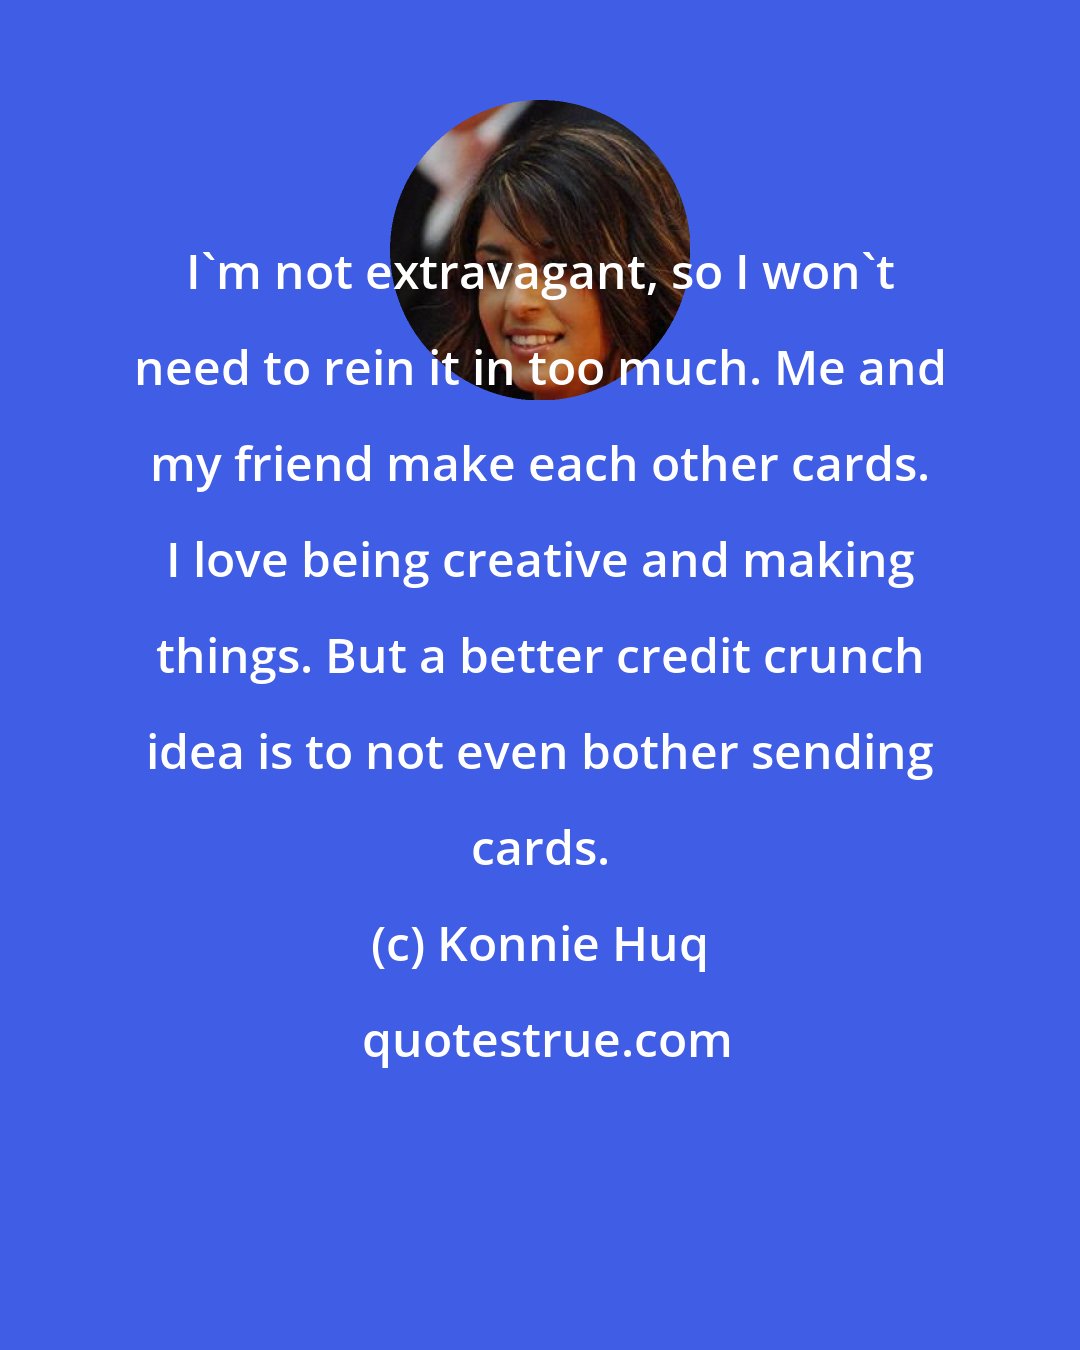 Konnie Huq: I'm not extravagant, so I won't need to rein it in too much. Me and my friend make each other cards. I love being creative and making things. But a better credit crunch idea is to not even bother sending cards.